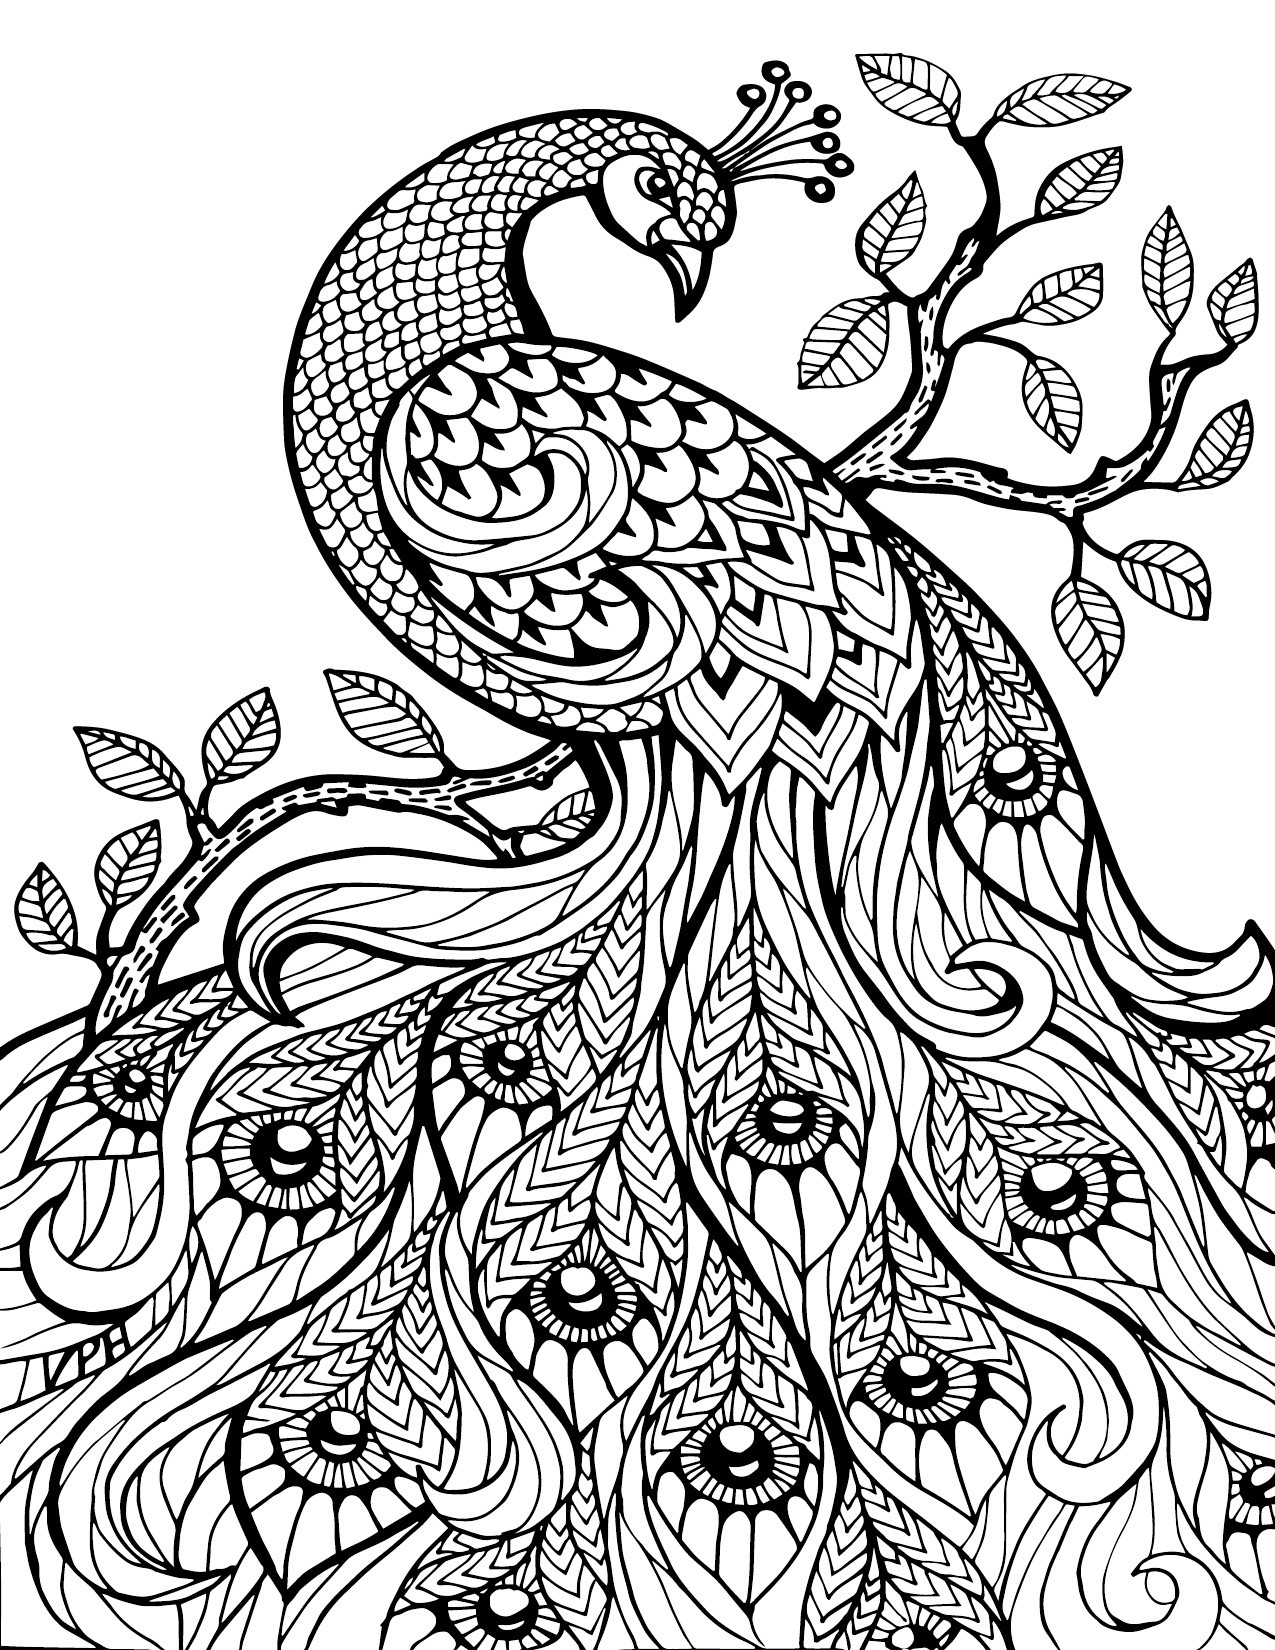 Adult Coloring Book Download
 Free Download Adult Coloring Pages